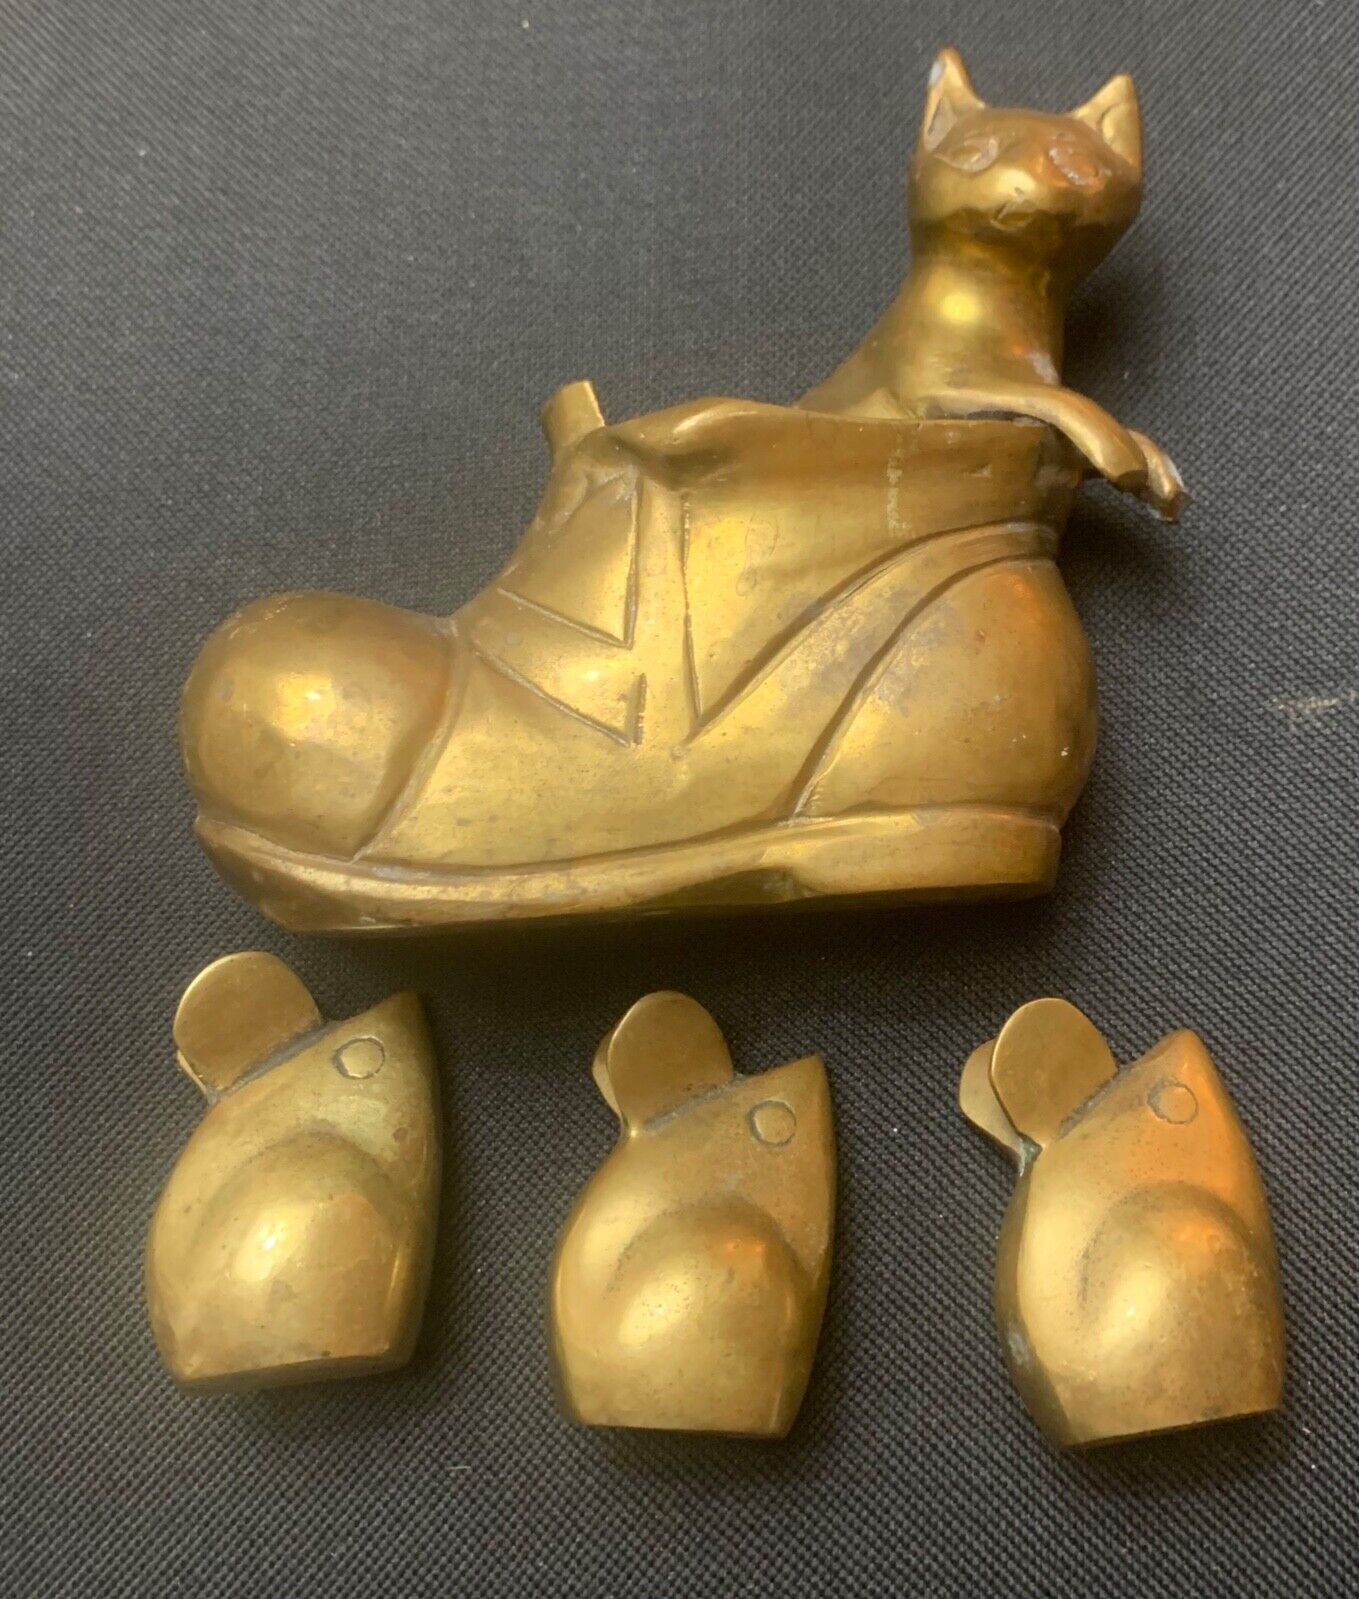 VINTAGE SOLID BRASS PUSS IN BOOTS WITH 3 BLIND MICE